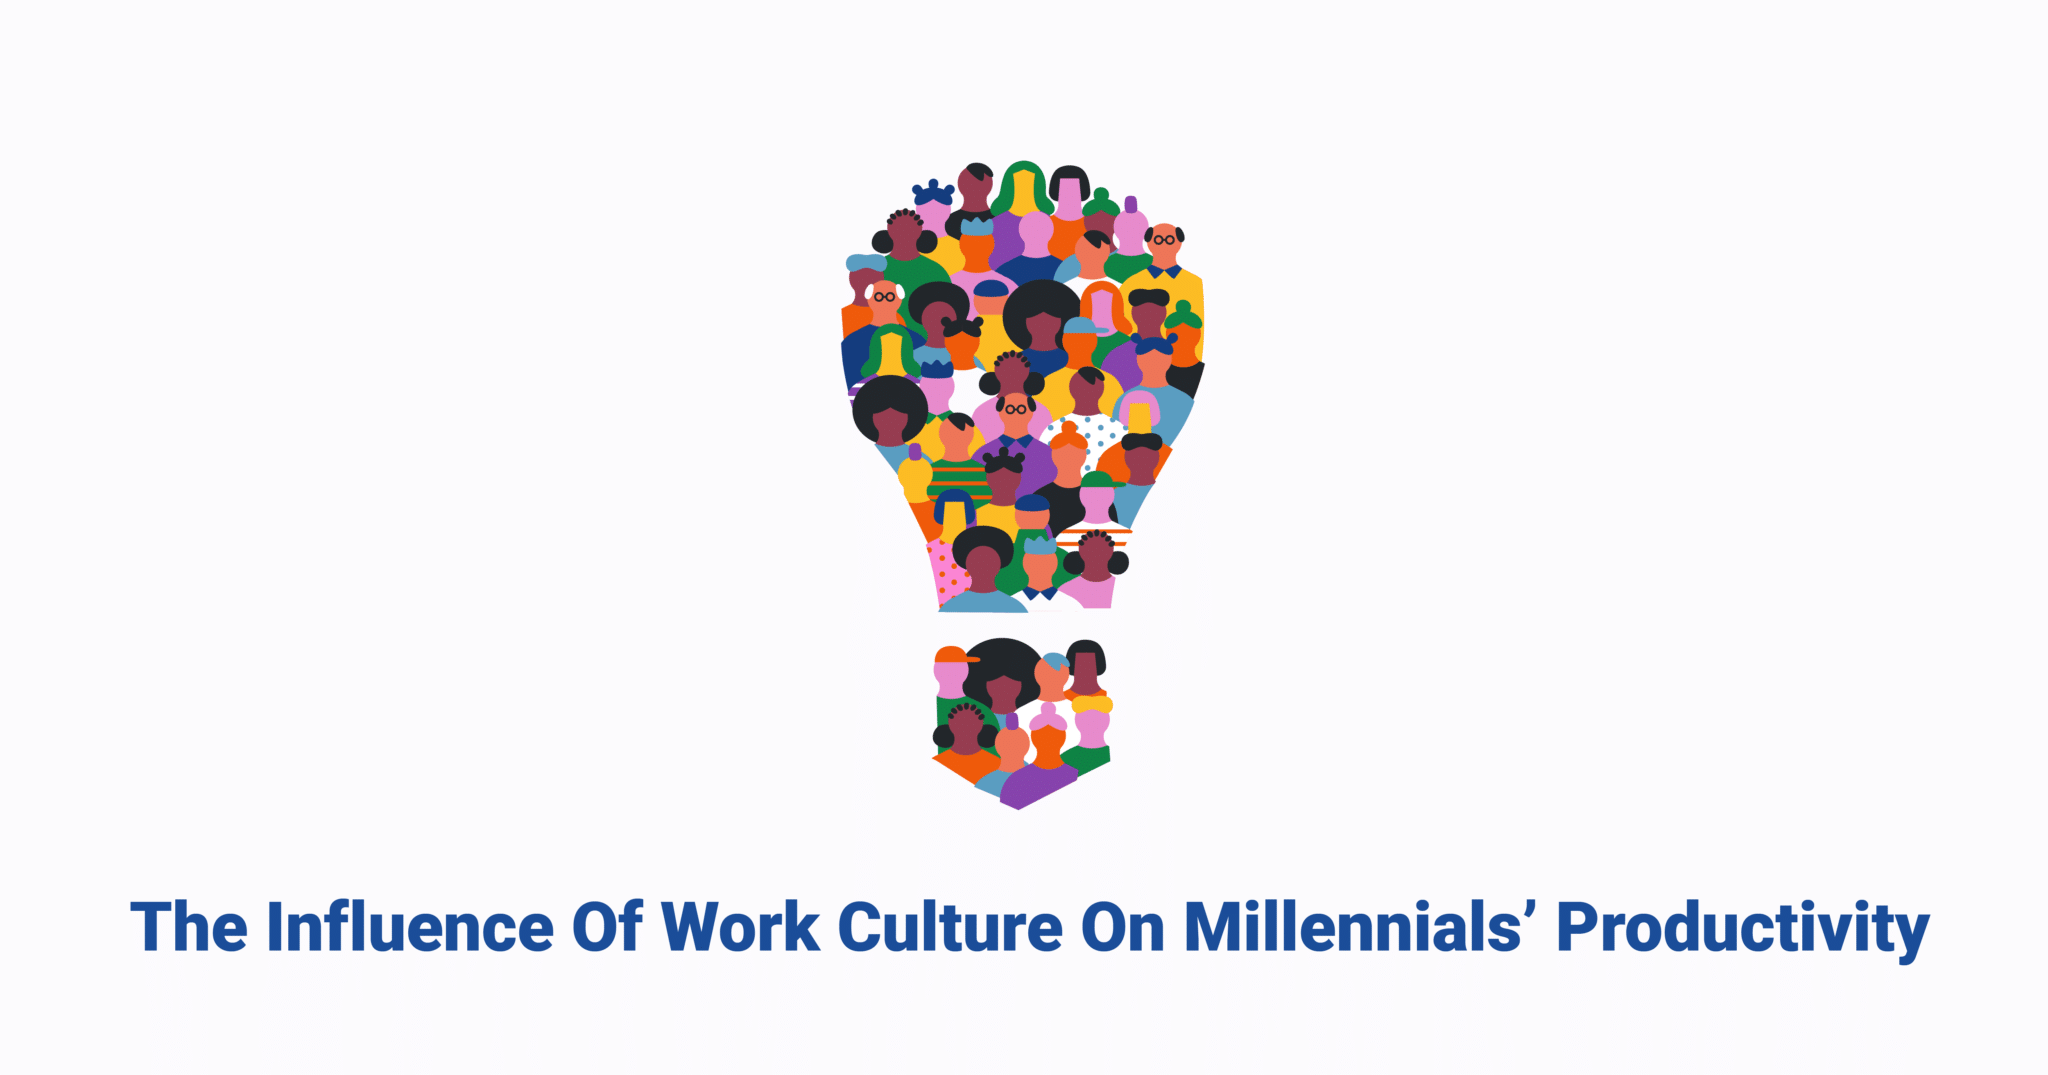 The Influence of Work Culture on Millennials’ Productivity